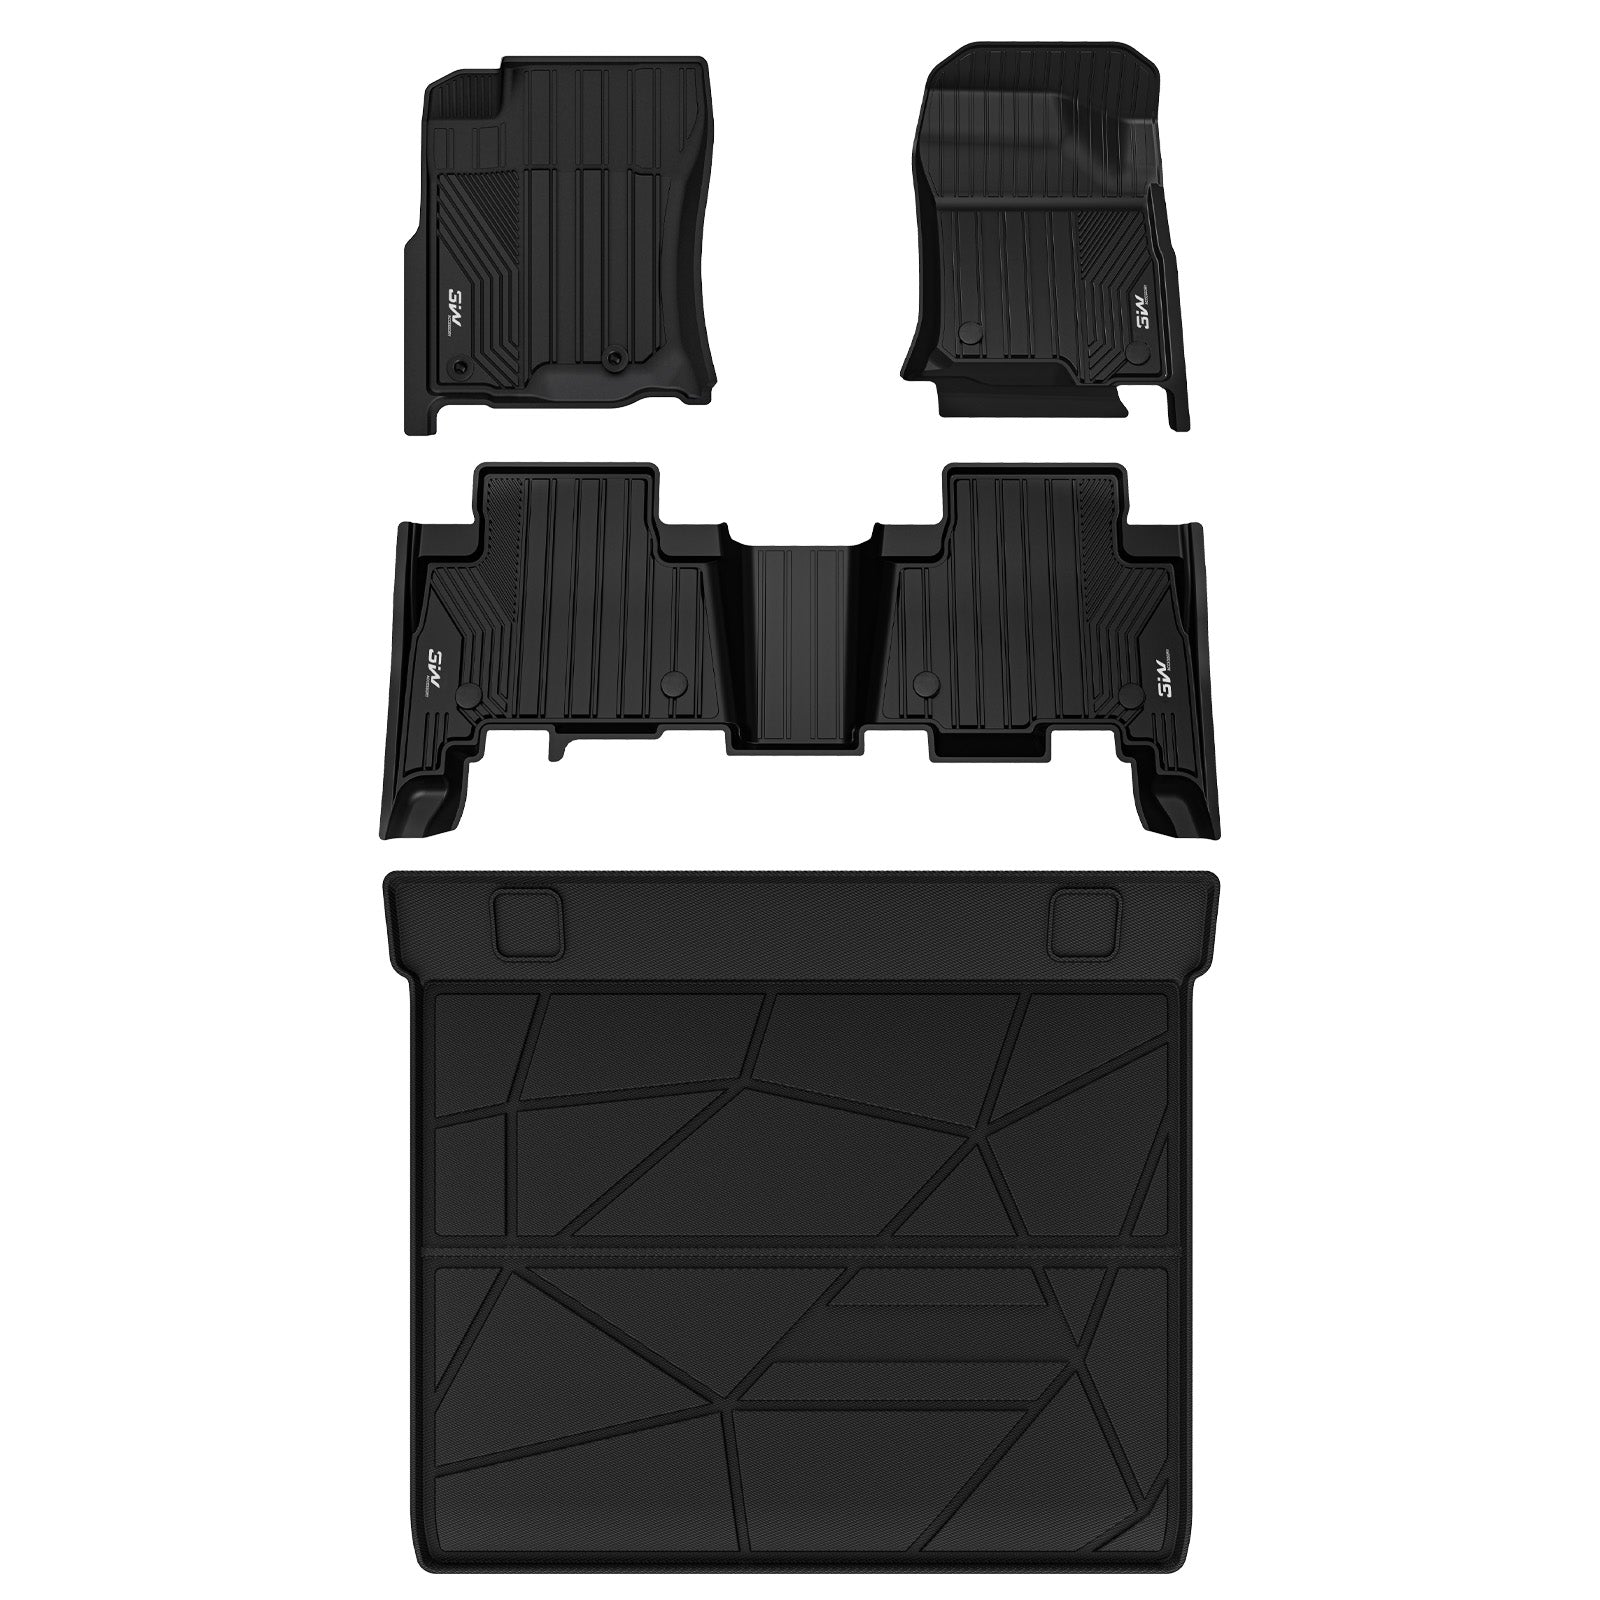 3W Lexus GX460 2014-2022 (Only for 5 Seats) Custom Floor Mats TPE Material & All-Weather Protection Vehicles & Parts 3w 2014-2022 GX460 2014-2022 1st&2nd Row+Trunk Mat